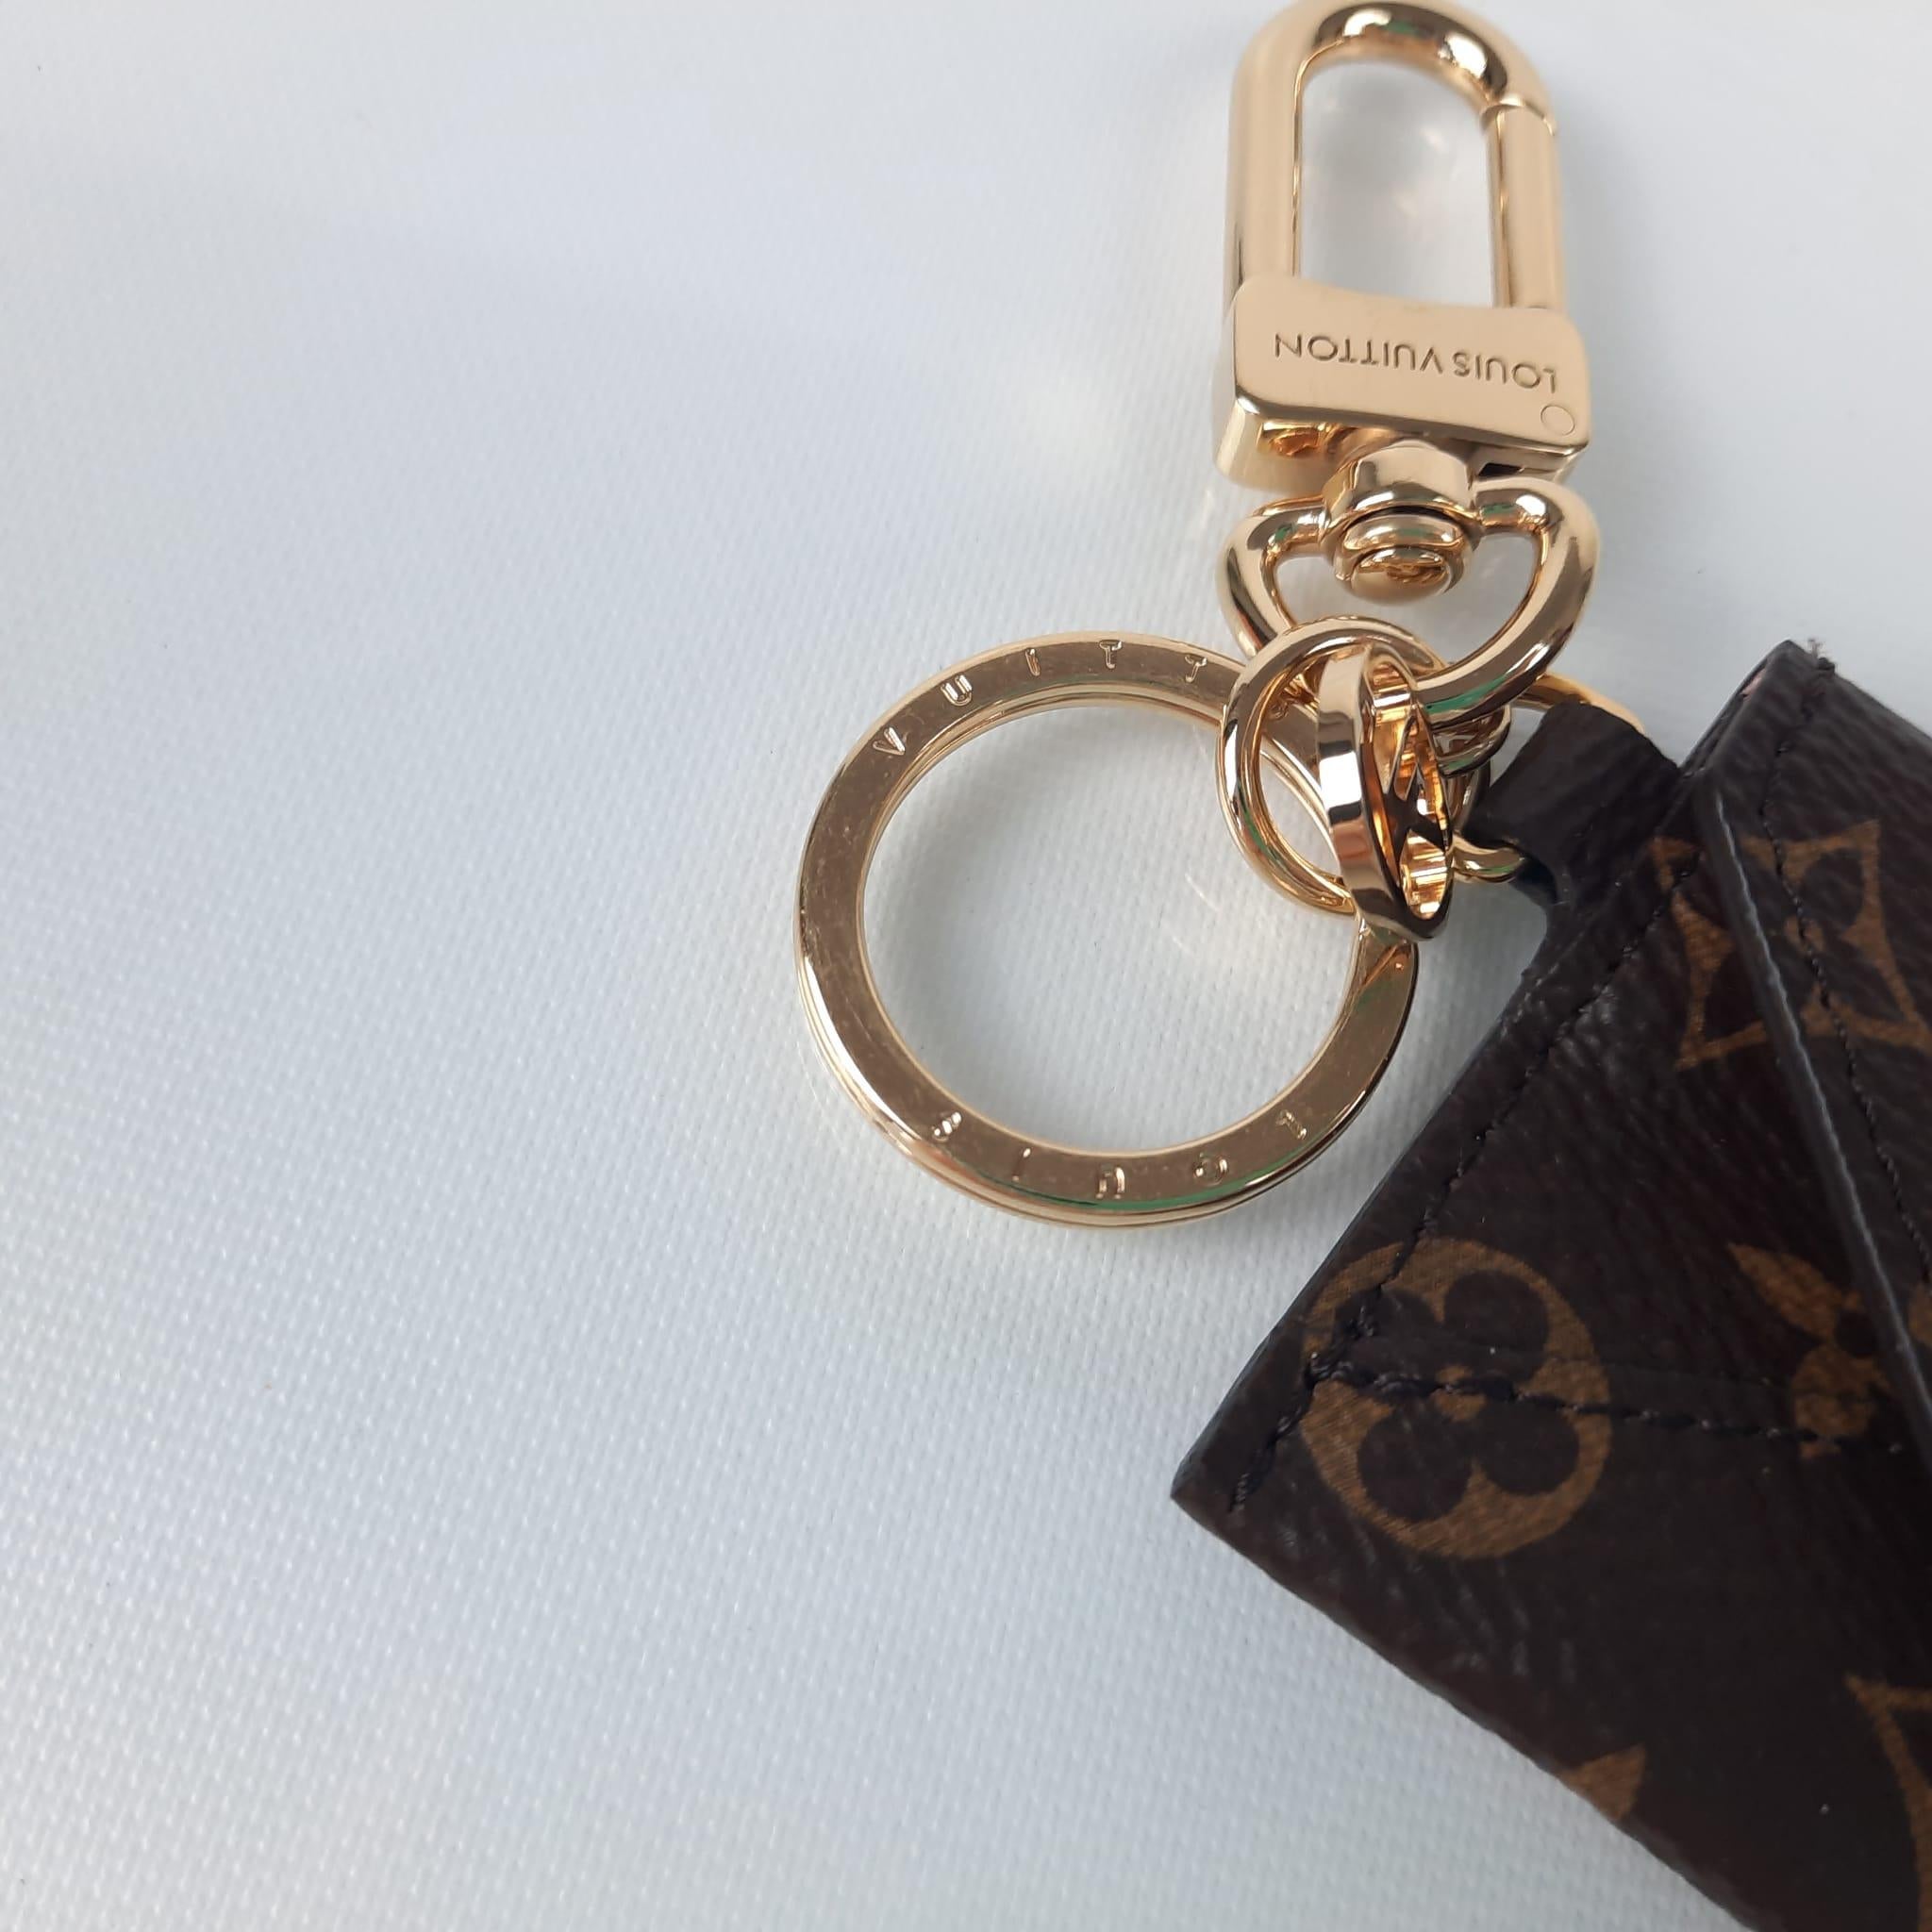 Louis Vuitton Bag charm and Kirigami pouch key ring monogram For Sale 4